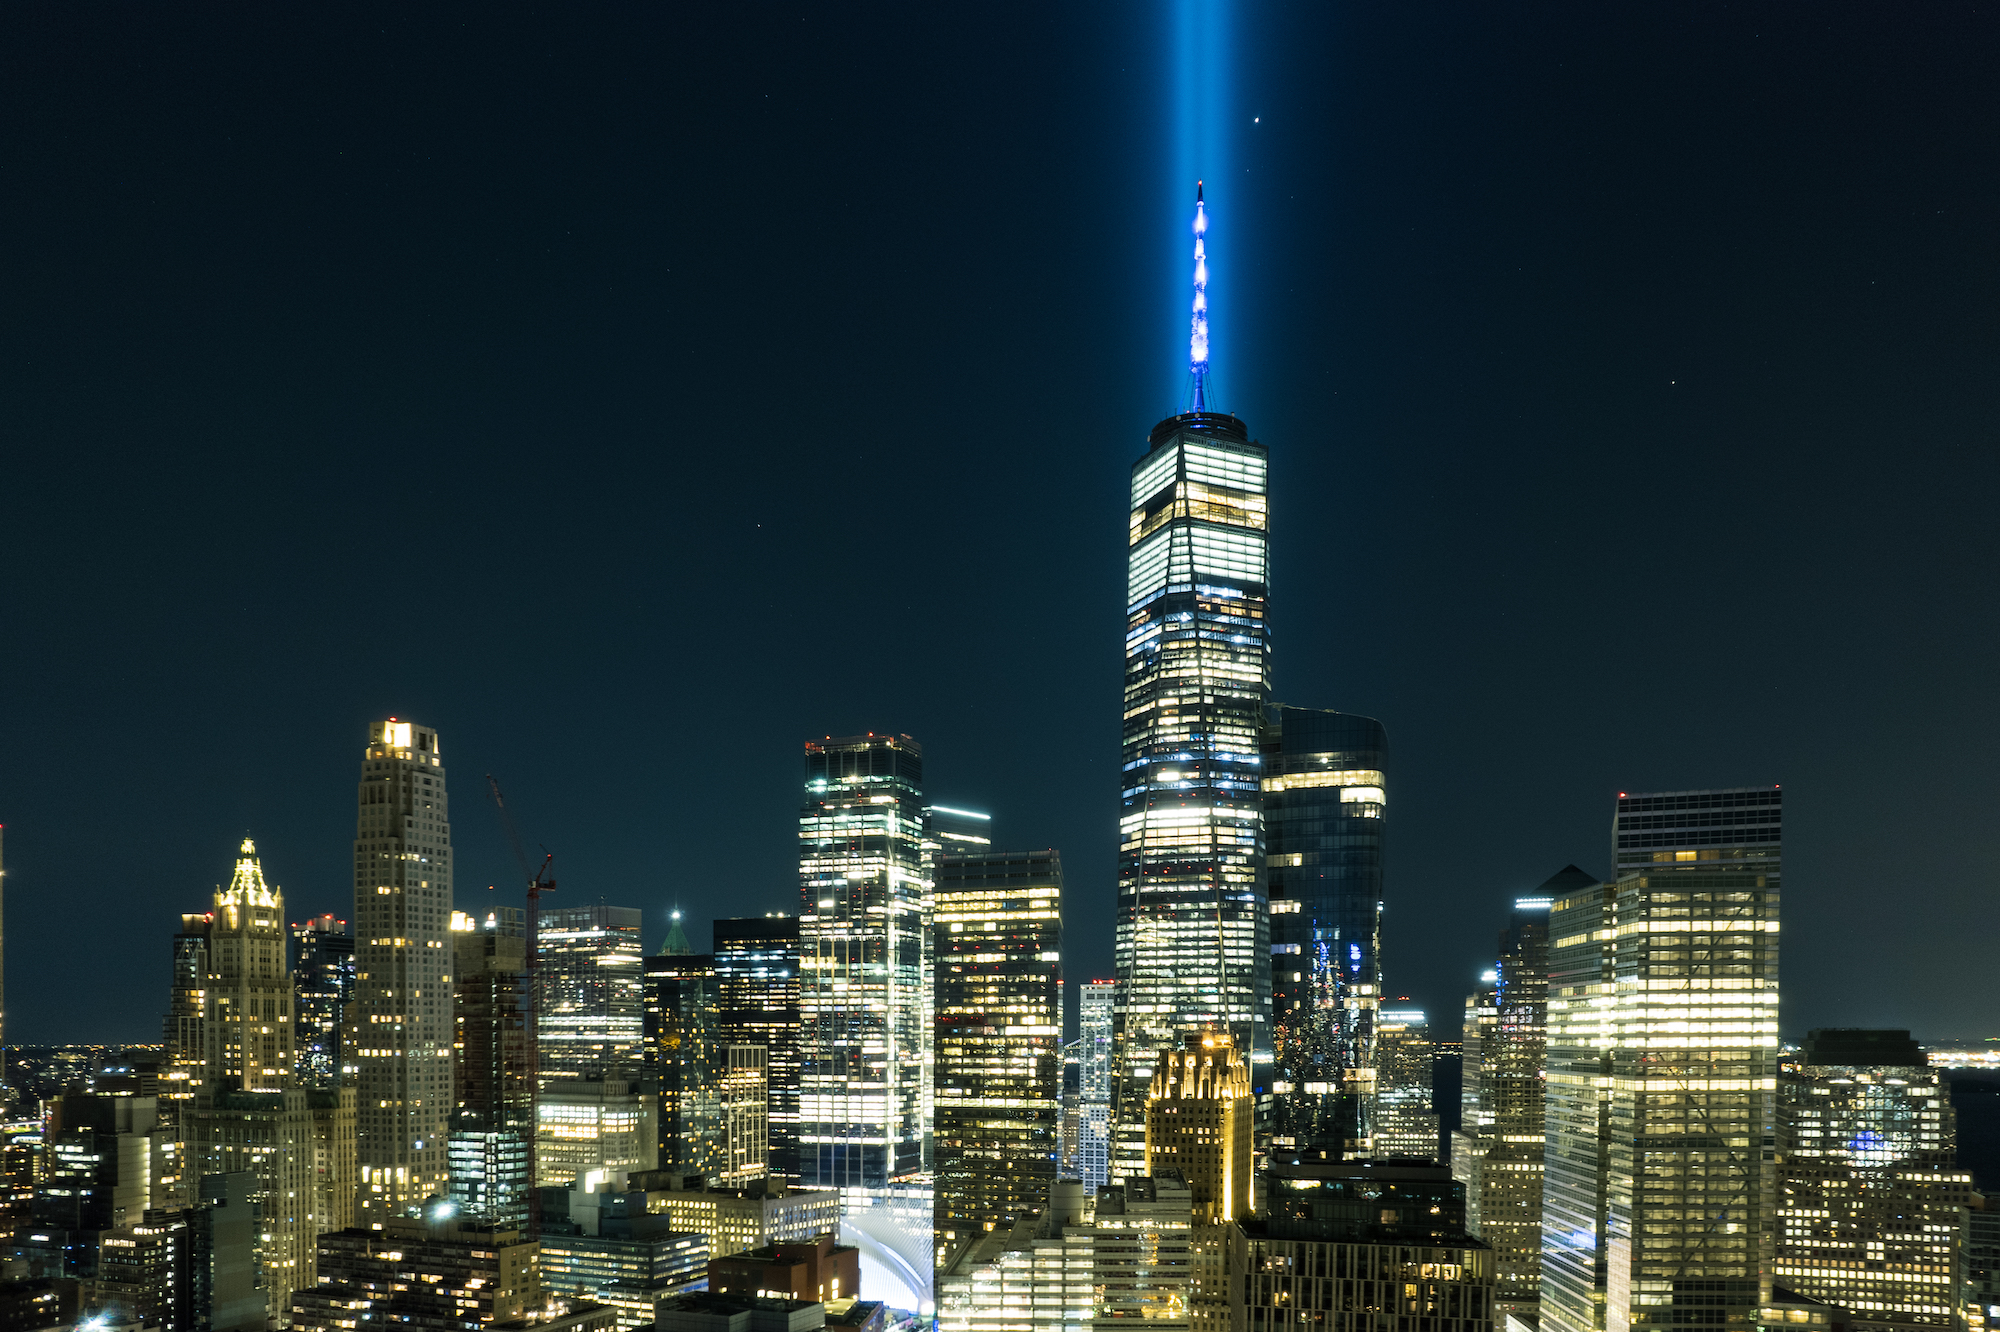 Two beams of blue light emanate from One World Trade Center, against a dark sky